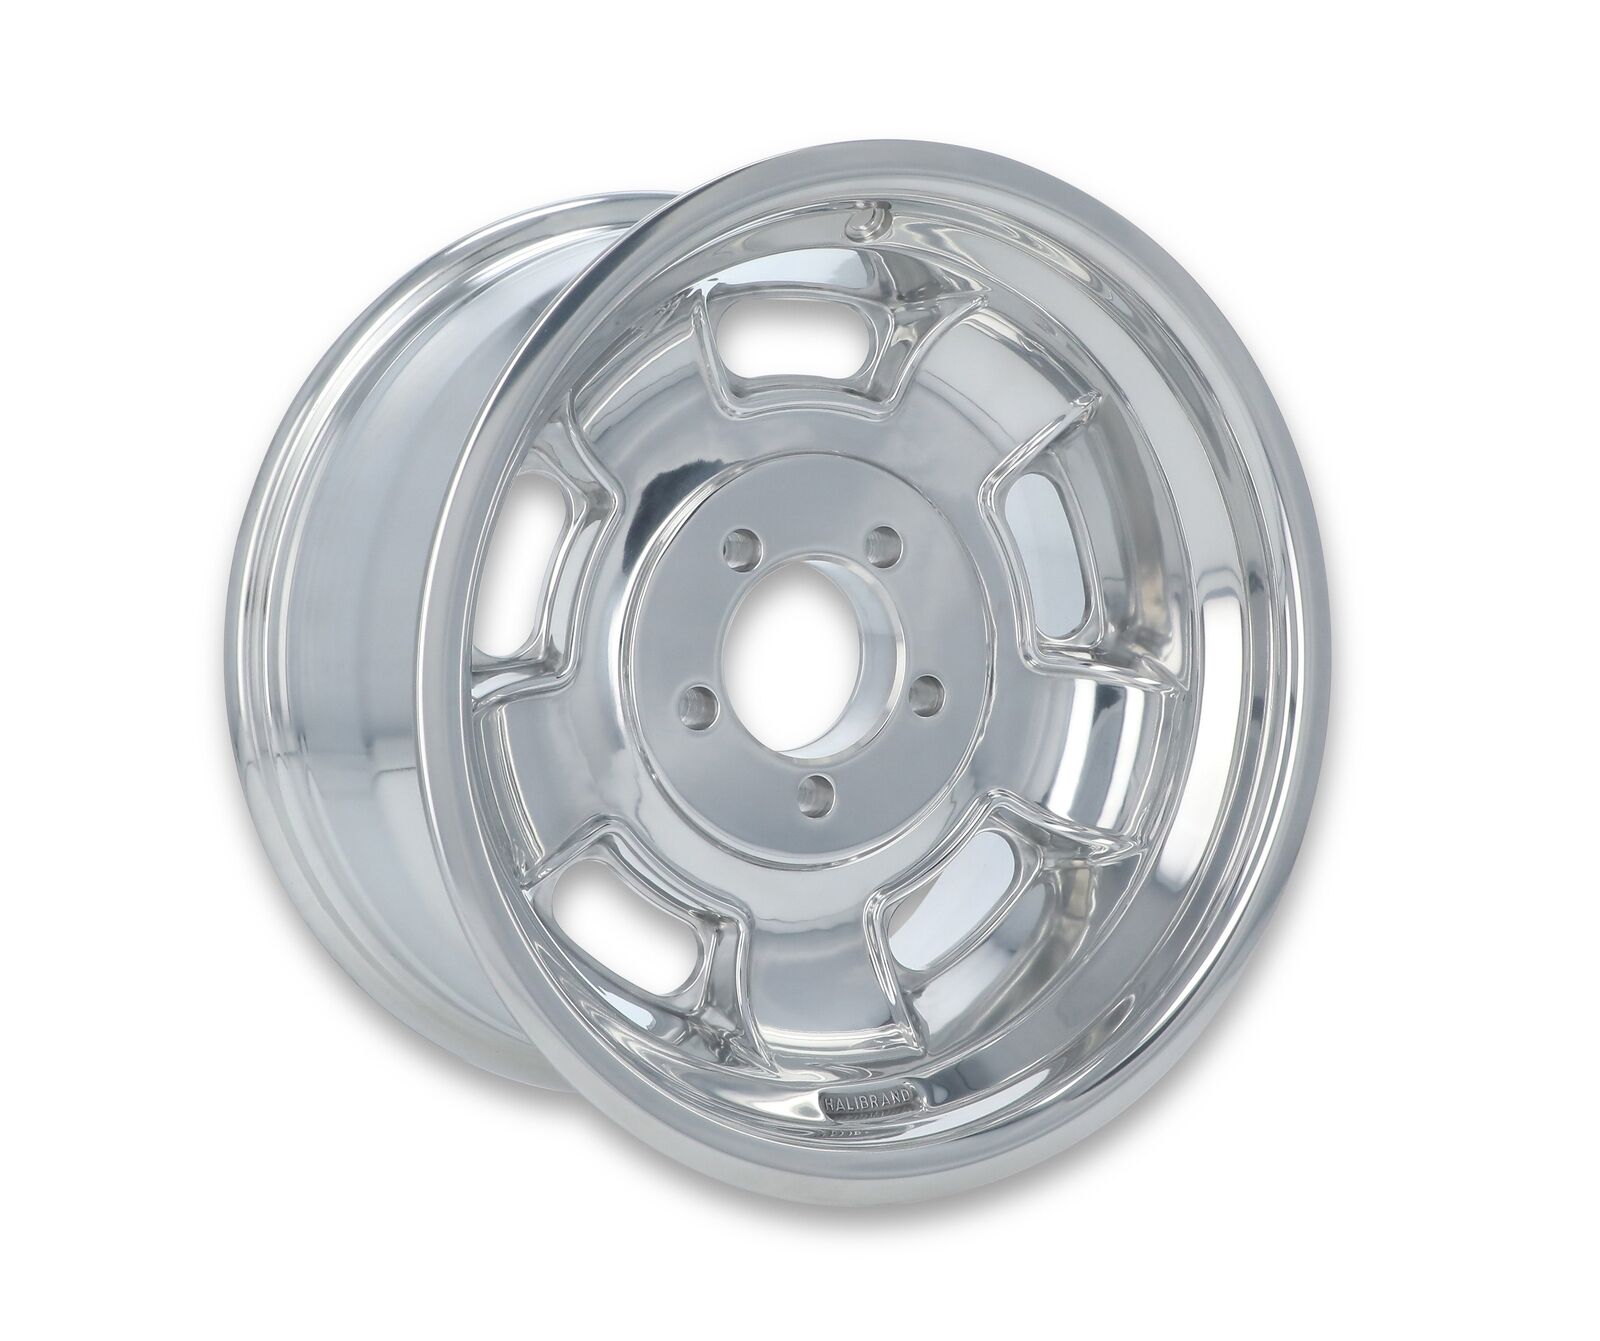 HB008-022 Halibrand Sprint Wheel 15x8 - 5x4.5 4.25 BS - Polished No Clearcoat